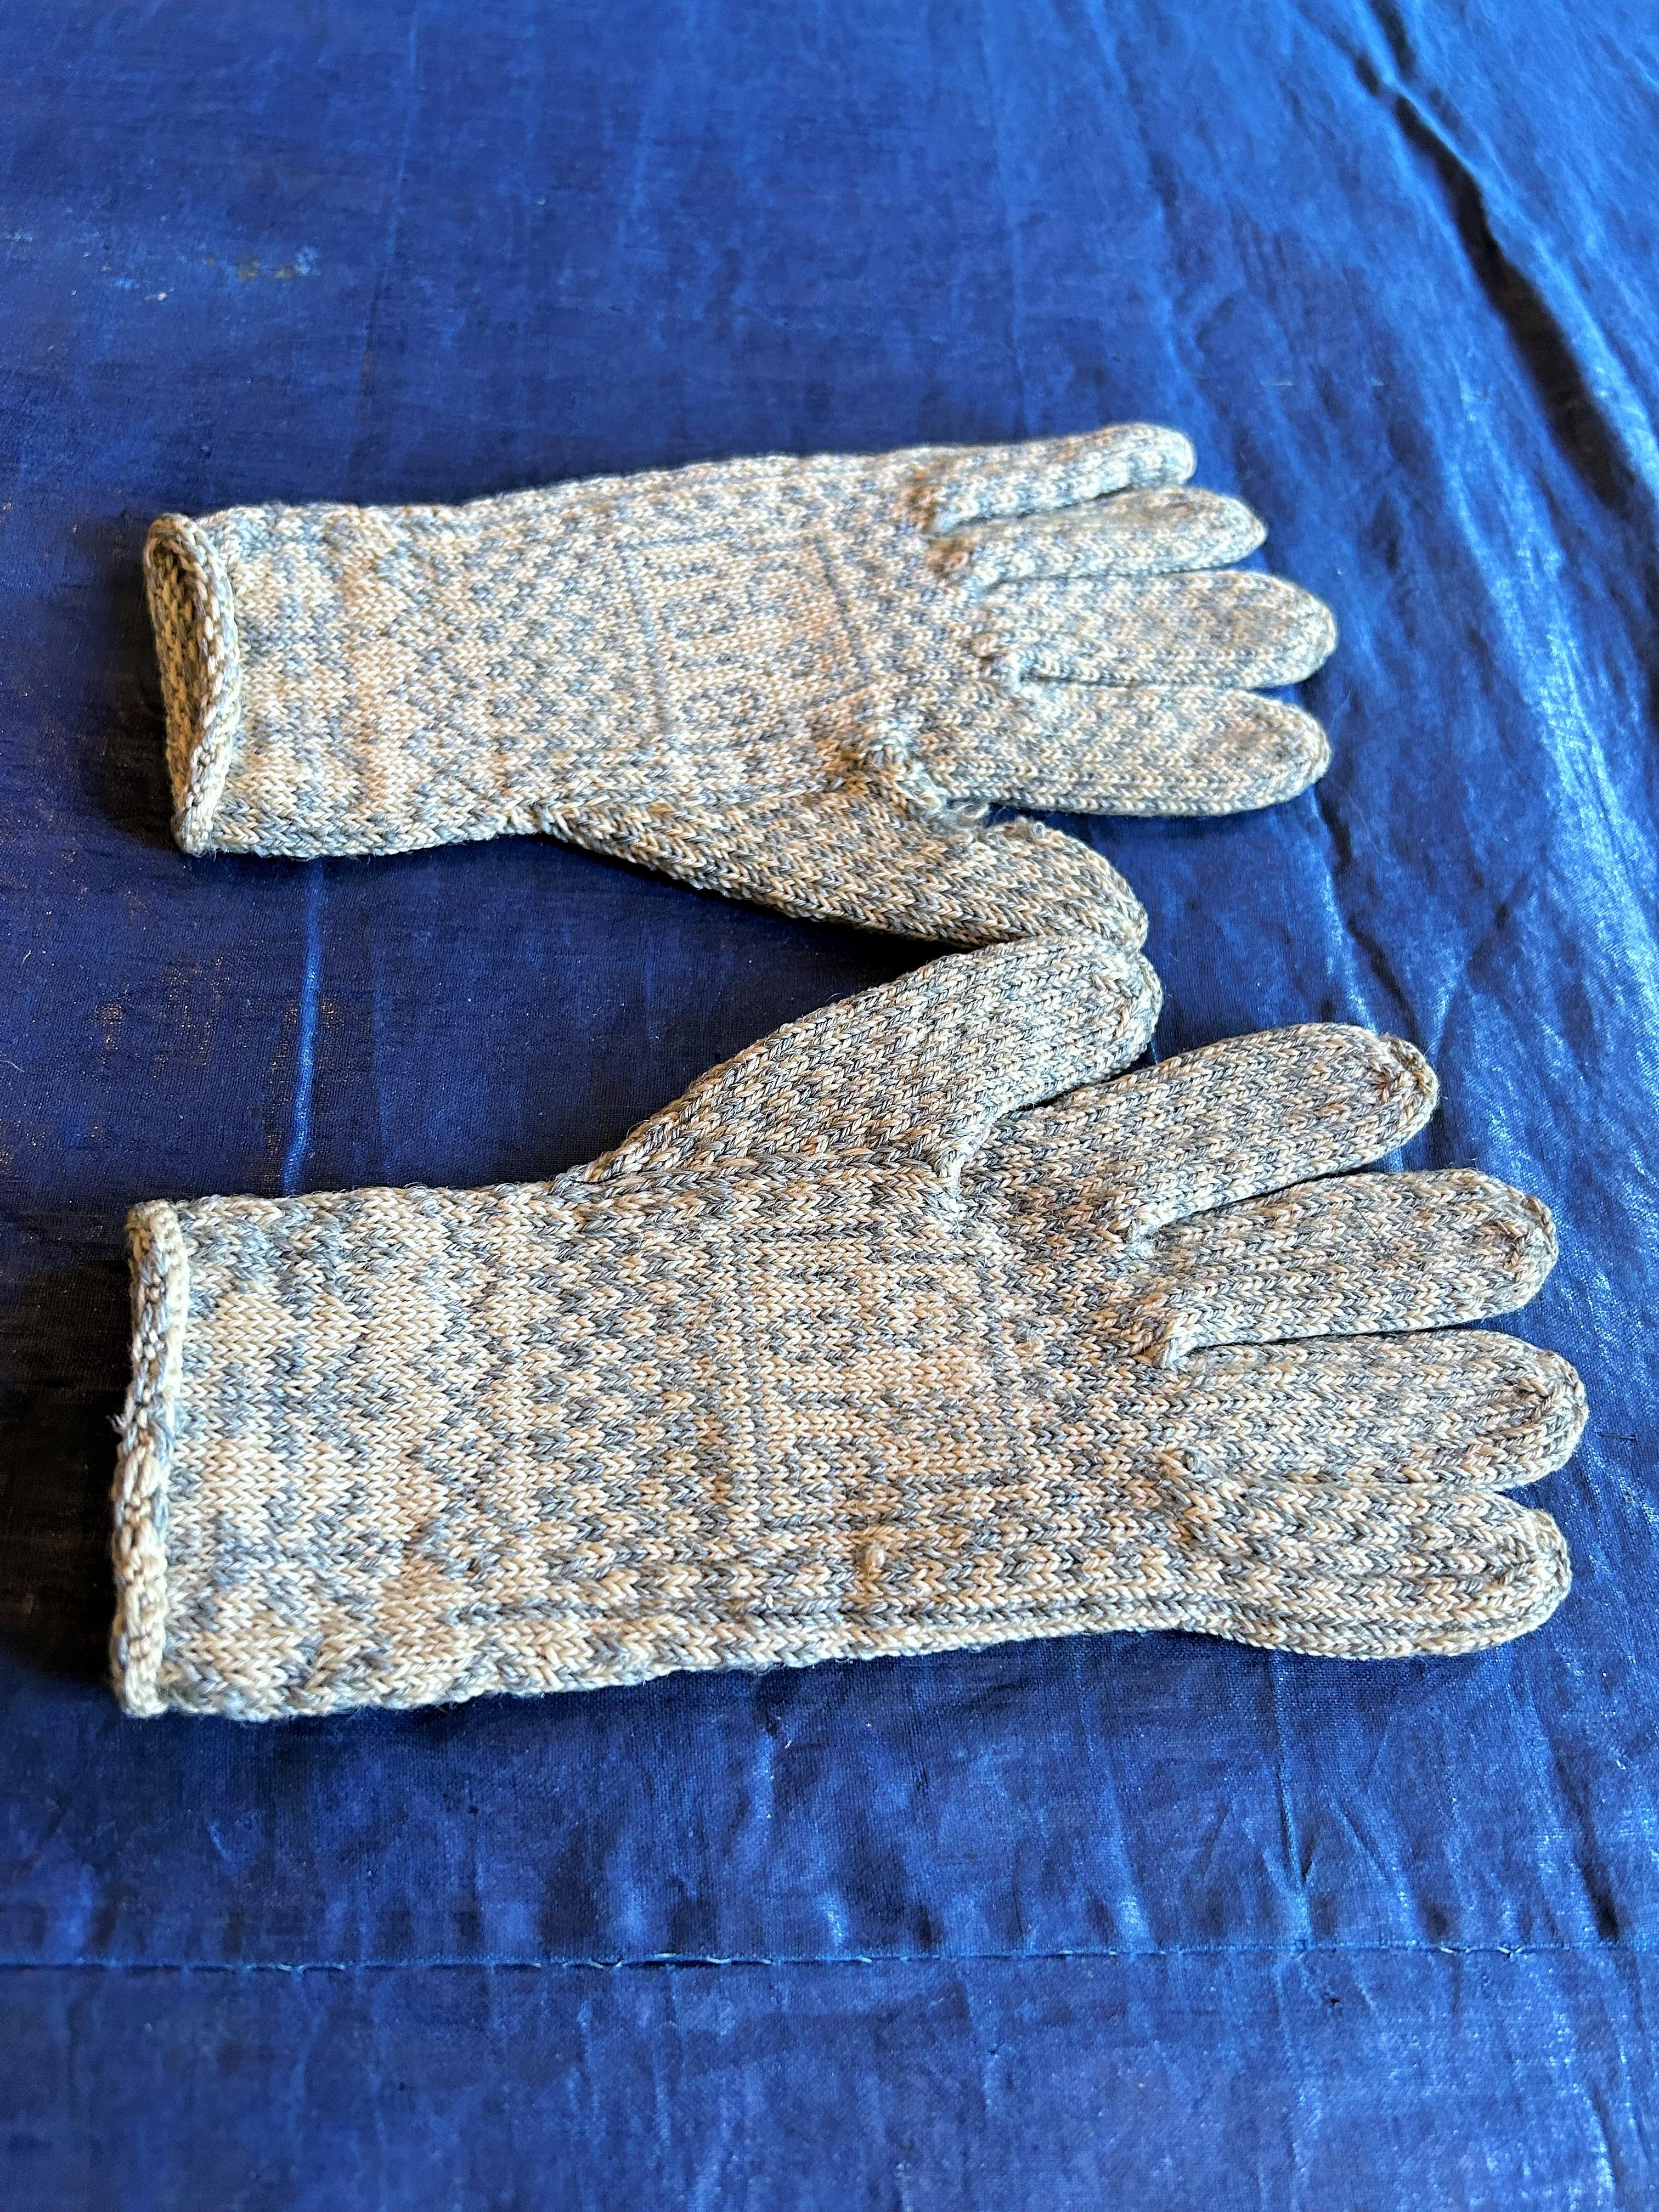 A pair of Sanquhar wool knitted gloves near Dumfries dated 1818 - Scotland 7